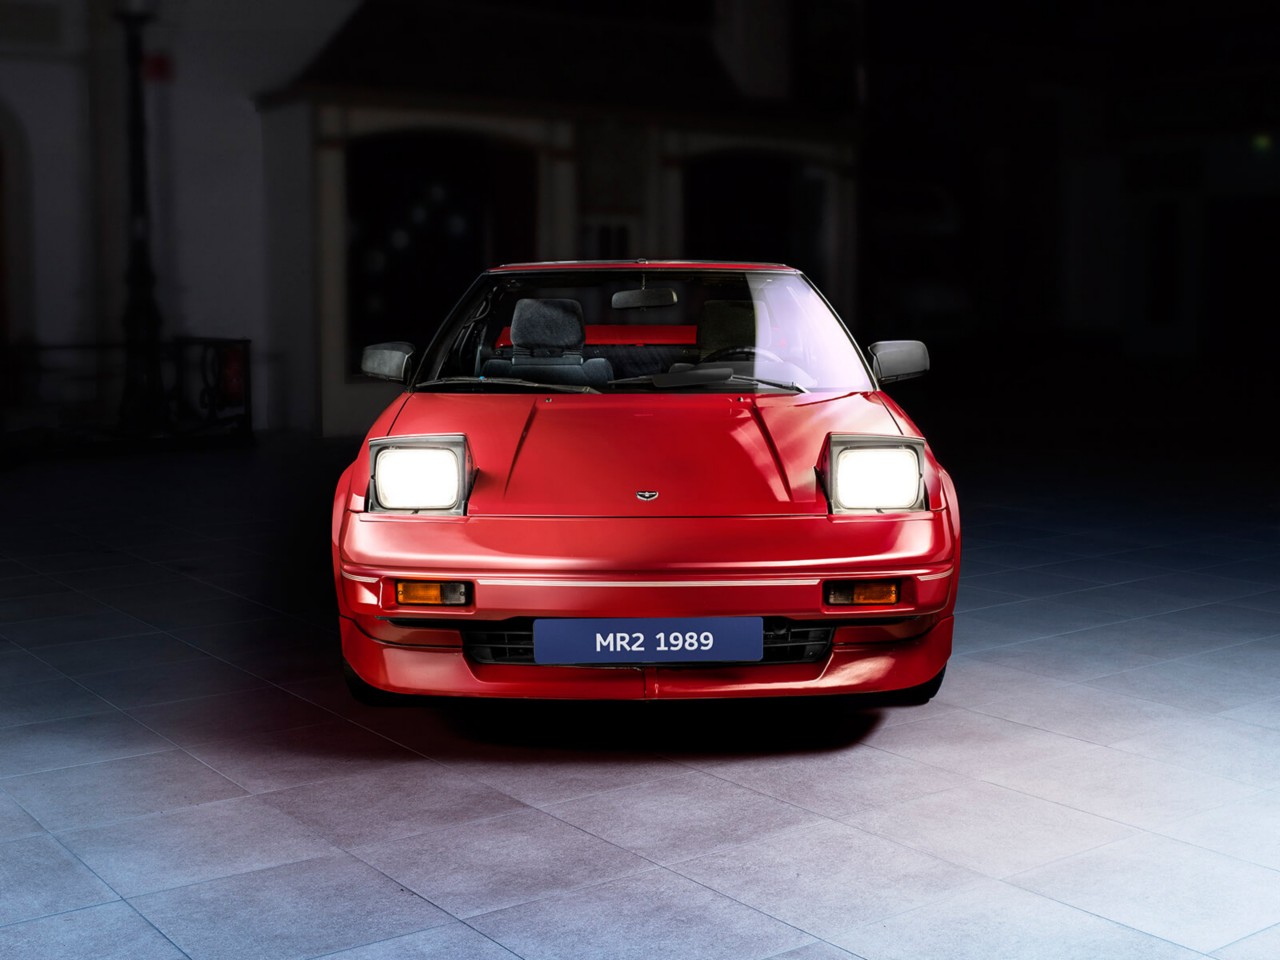 Toyota MR2 Sports car front angle